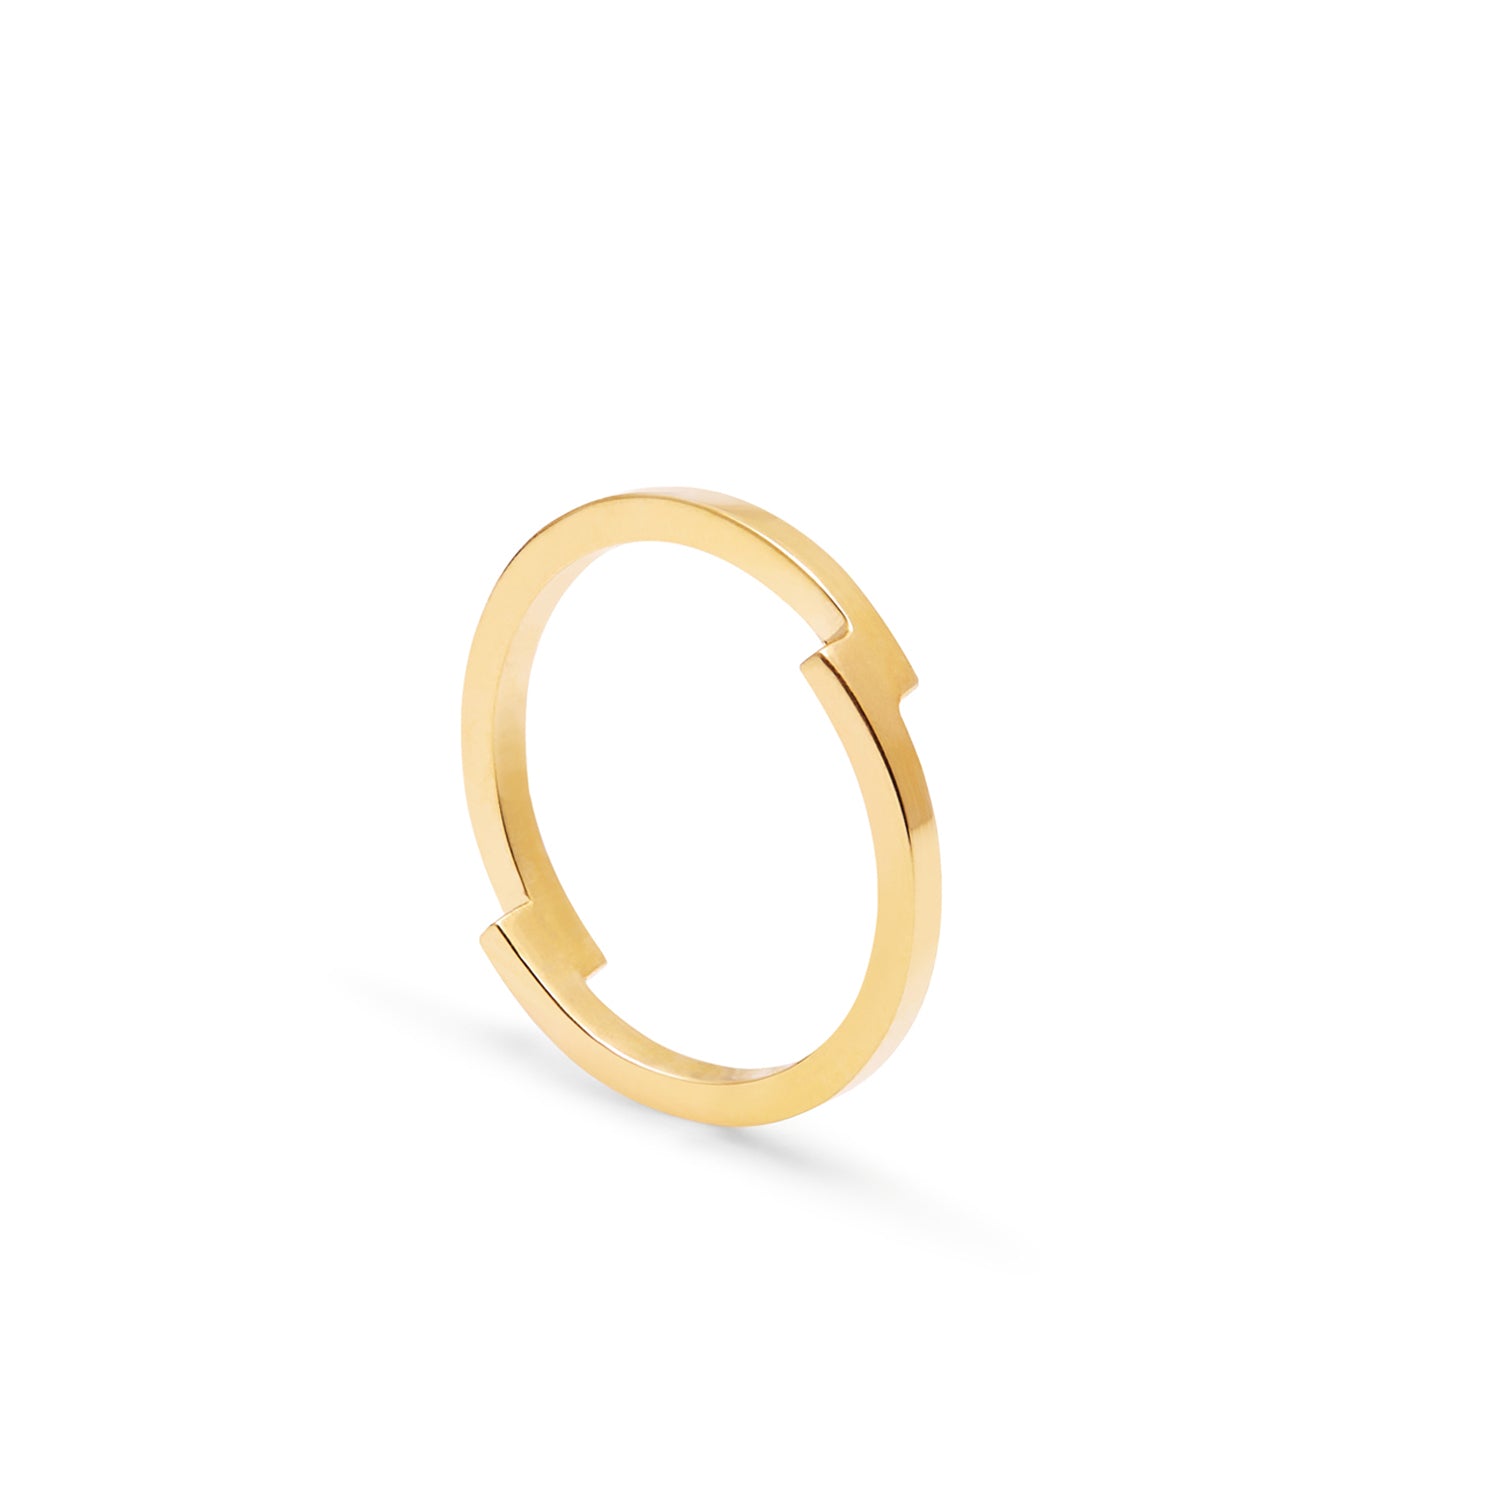 Double Arc Ring - Gold - Myia Bonner Jewellery